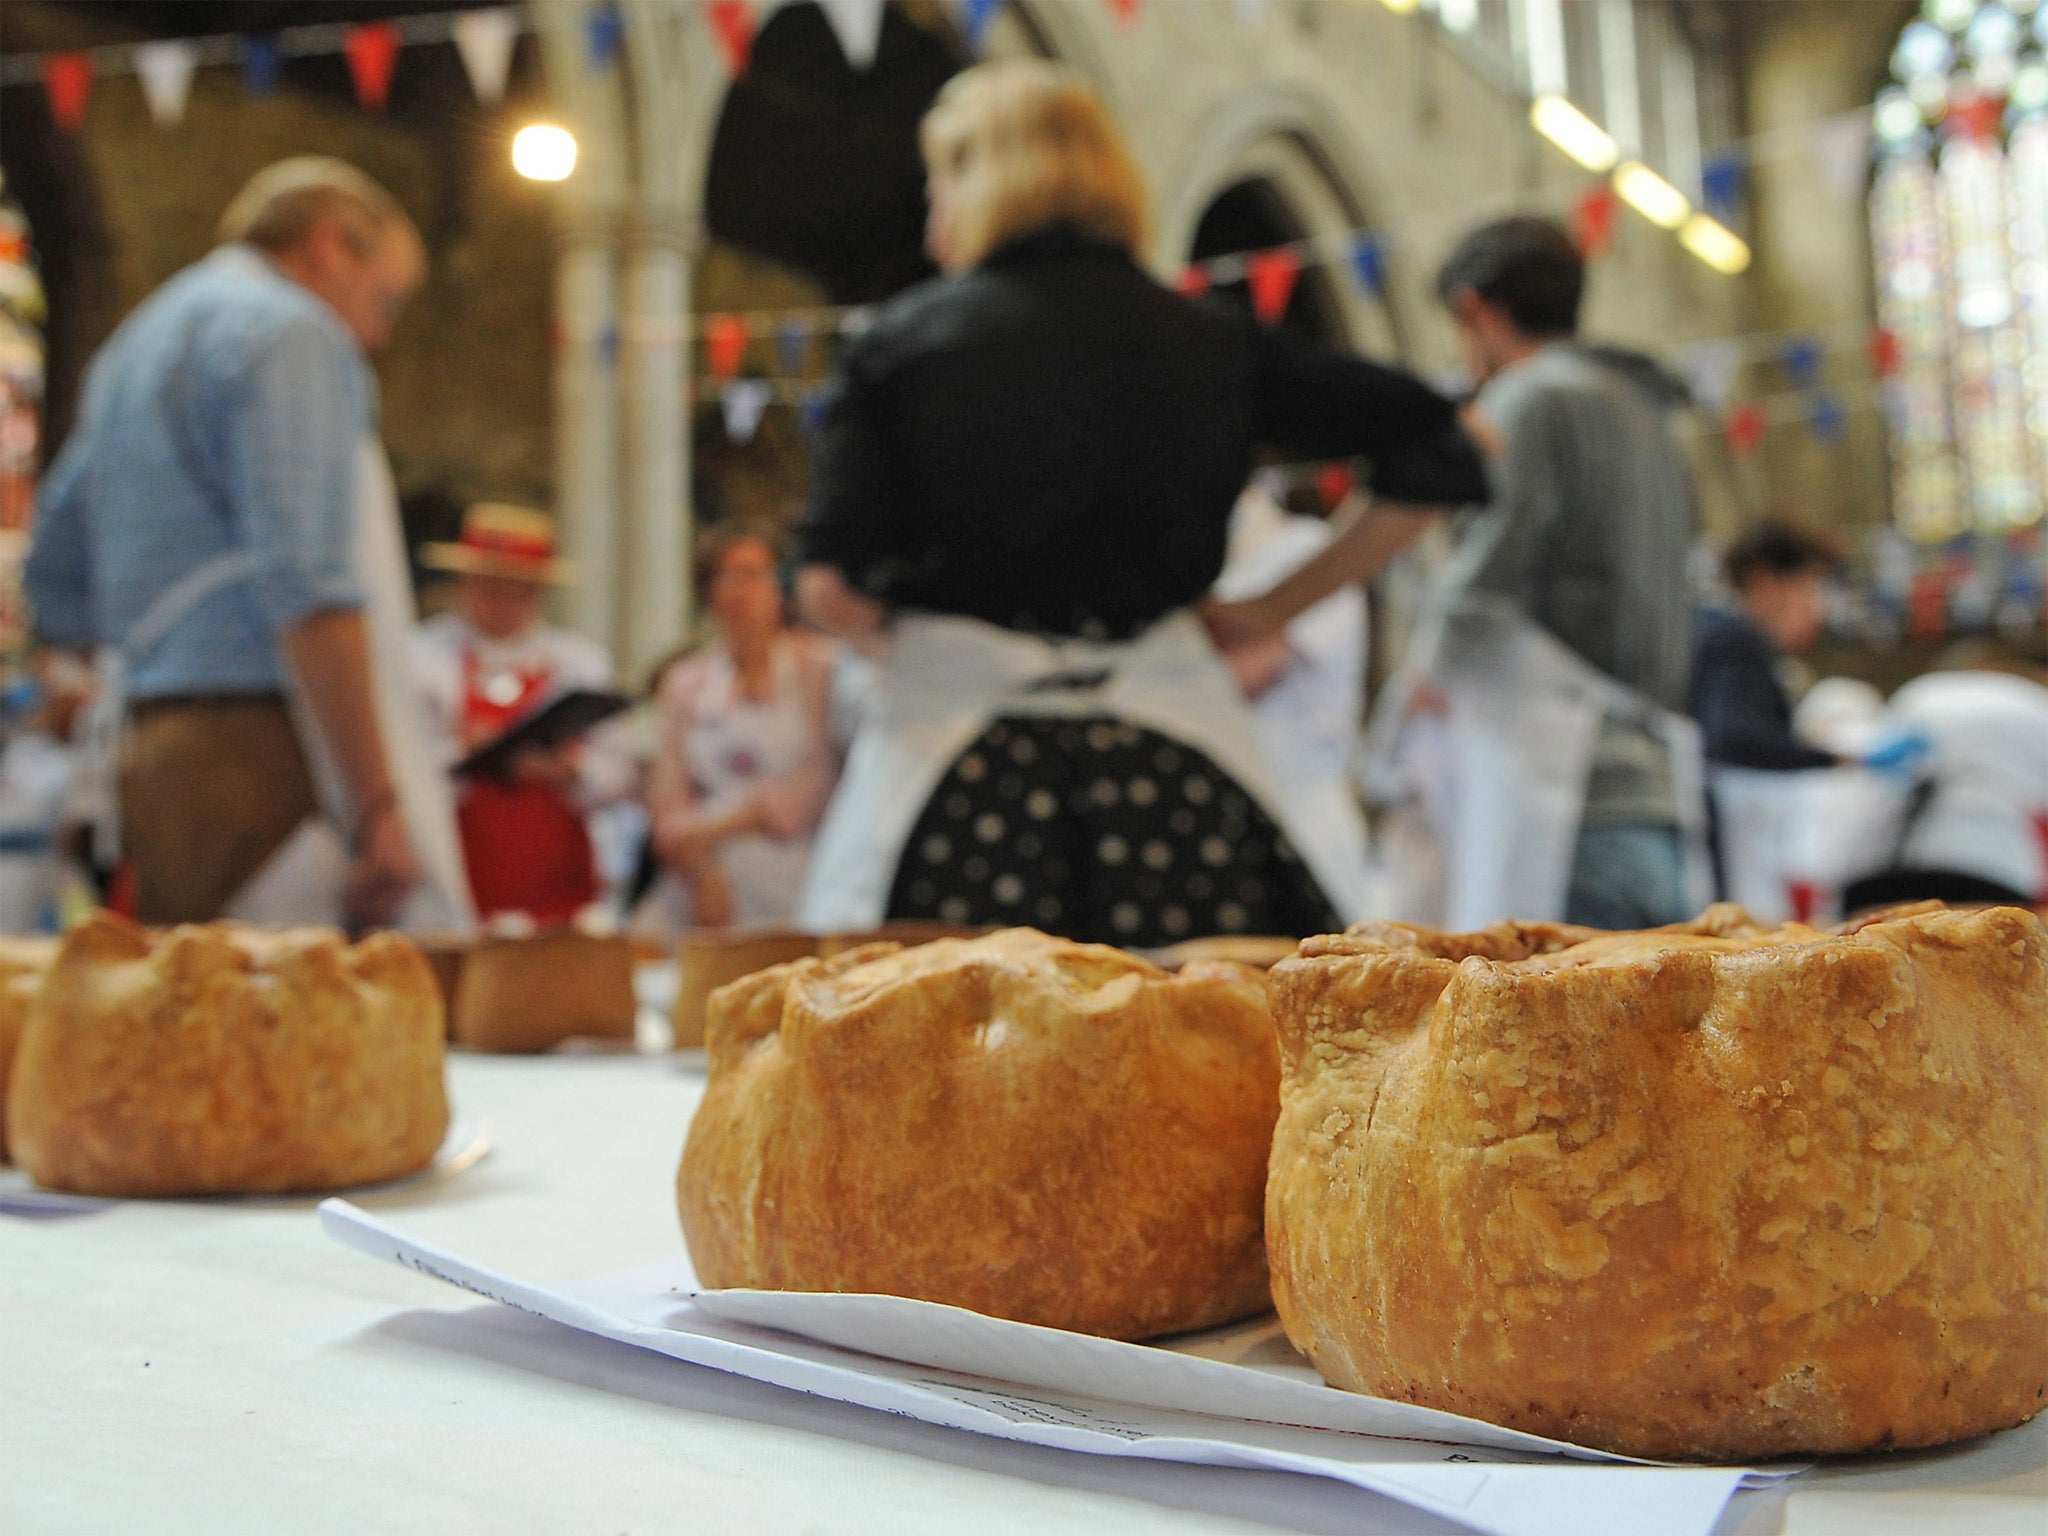 Some 825 pies are being tasted at St Mary’s Church in Melton Mowbray for the annual contest